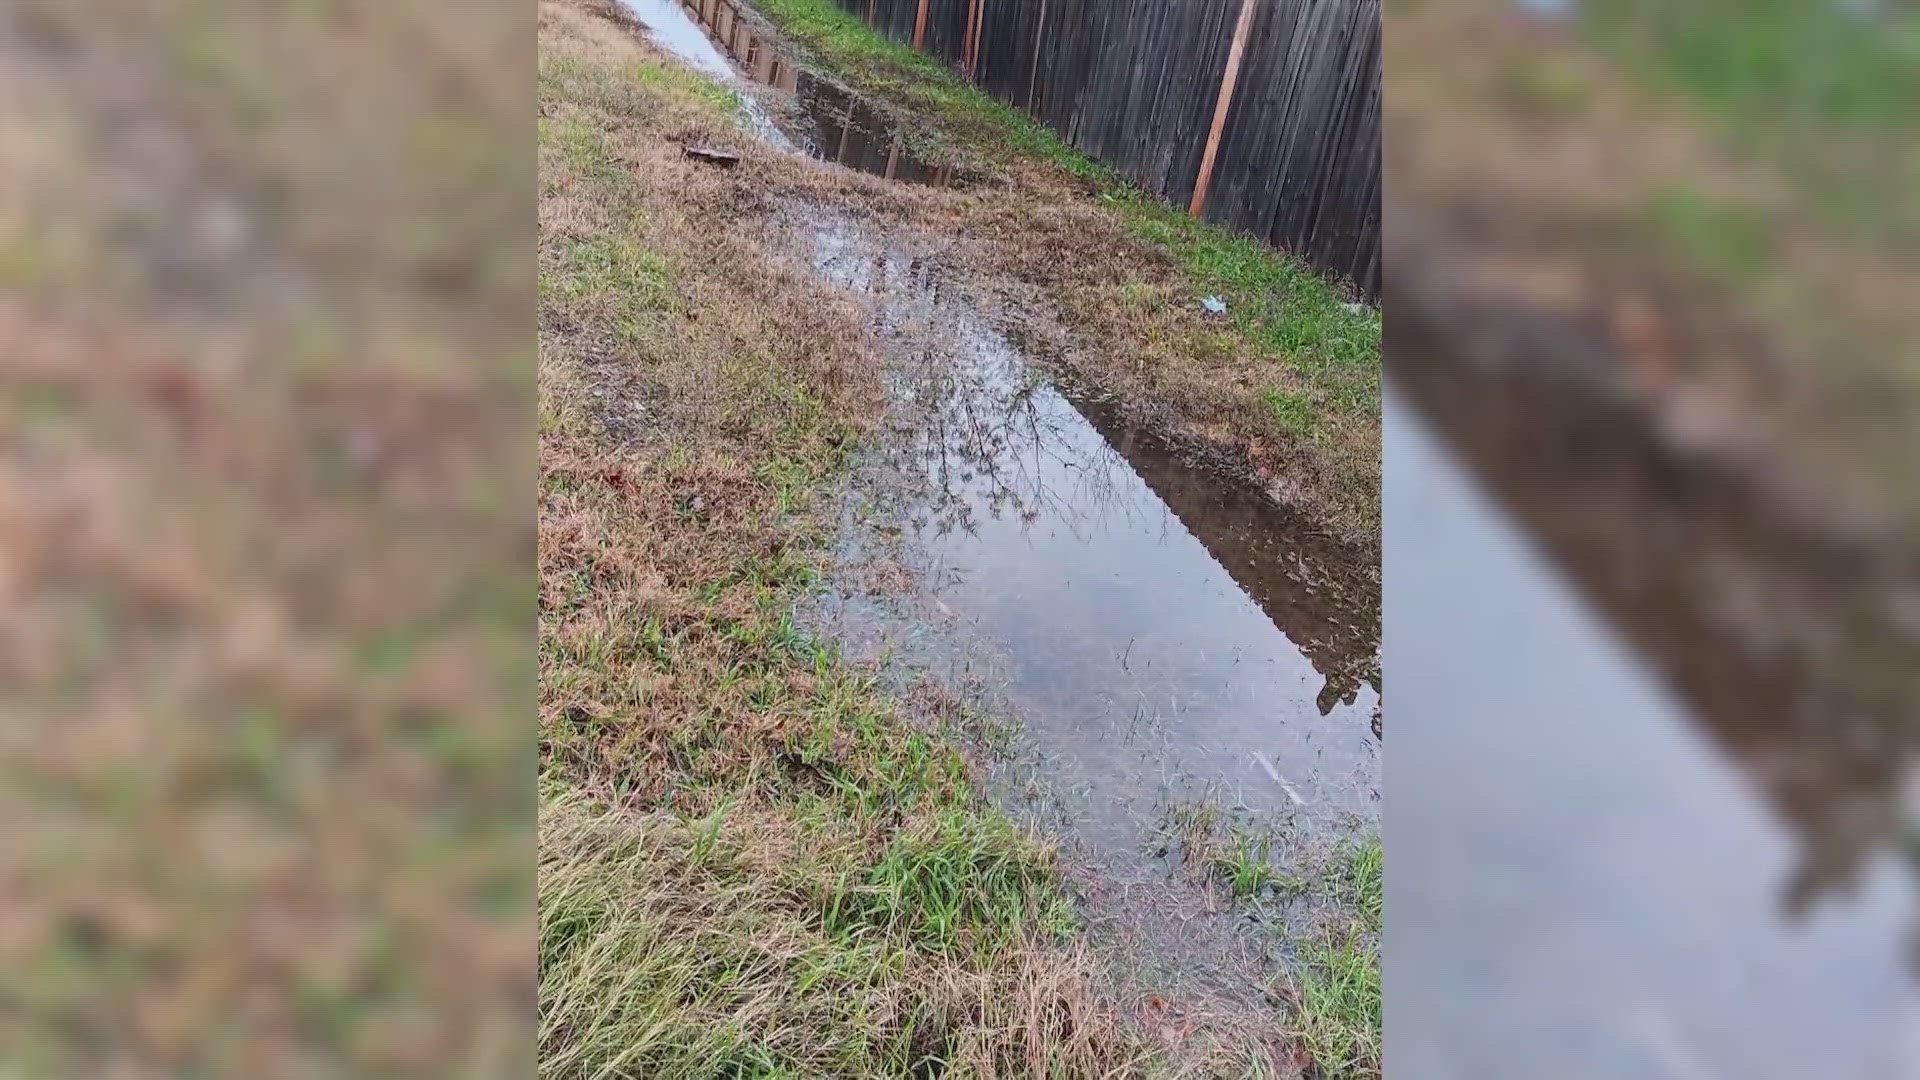 Robert Mendez wanted the city to fill in a ditch behind his home that kept collecting water. Now the city says he's in charge of the ditch.